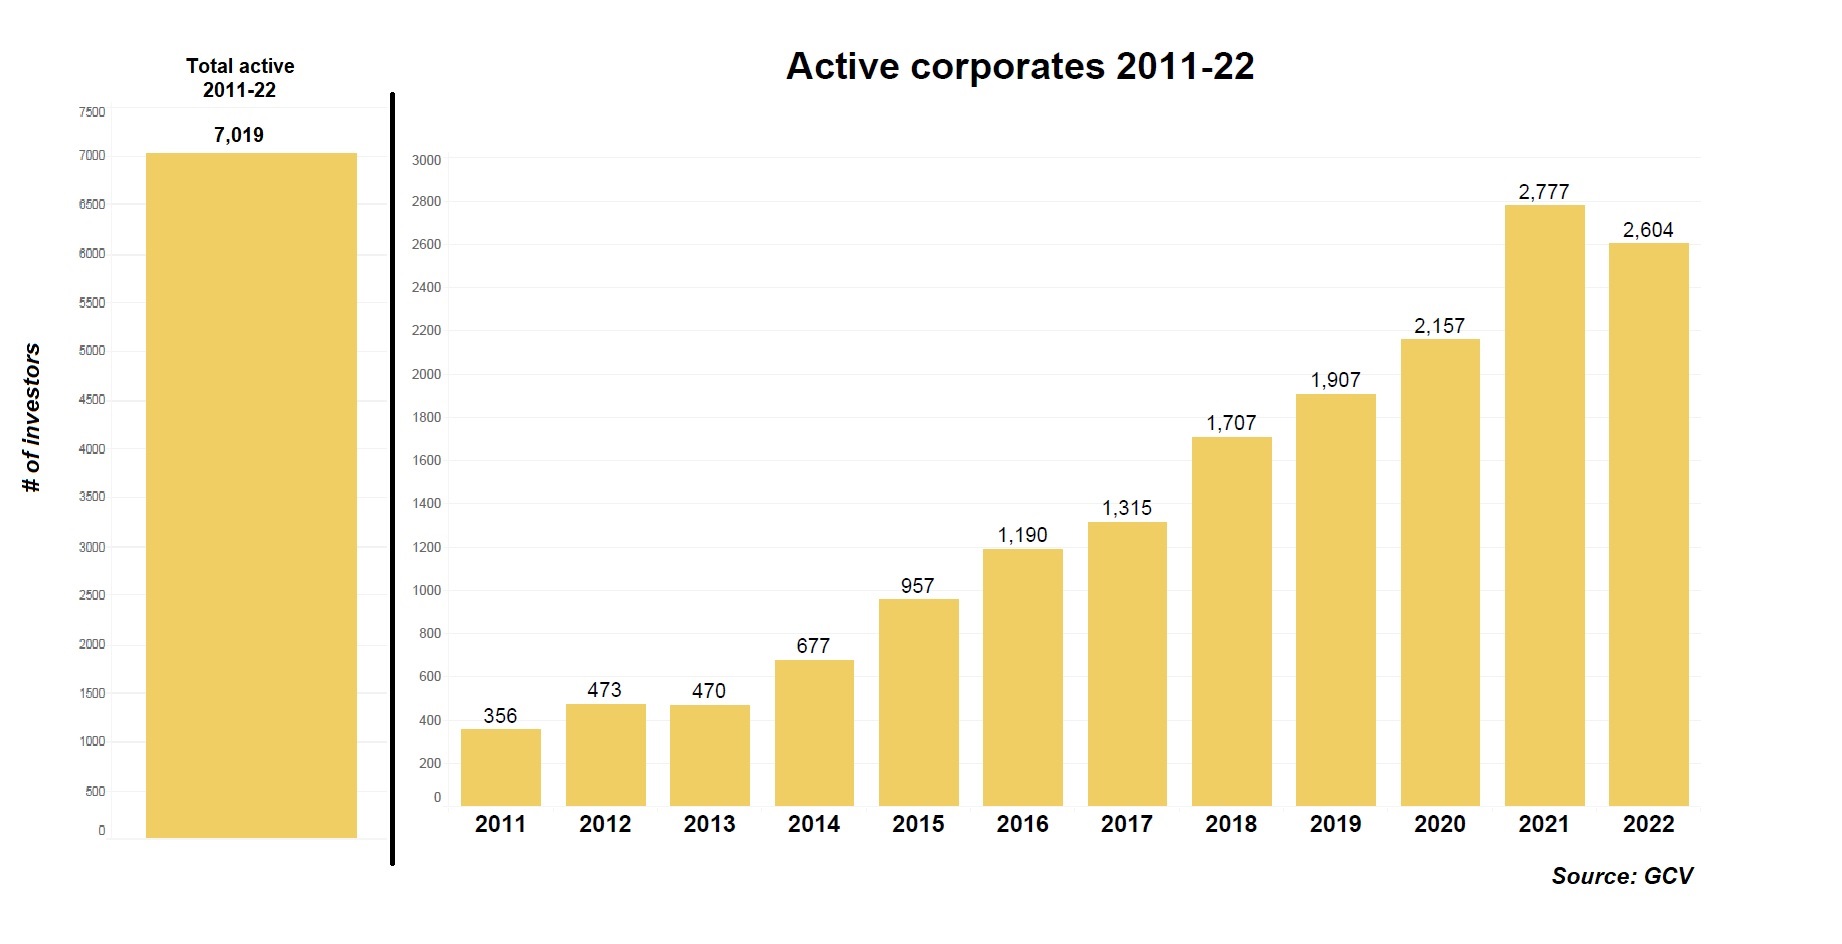 Chart showing the evolution of active corporate investors between 2011 and 2022. 